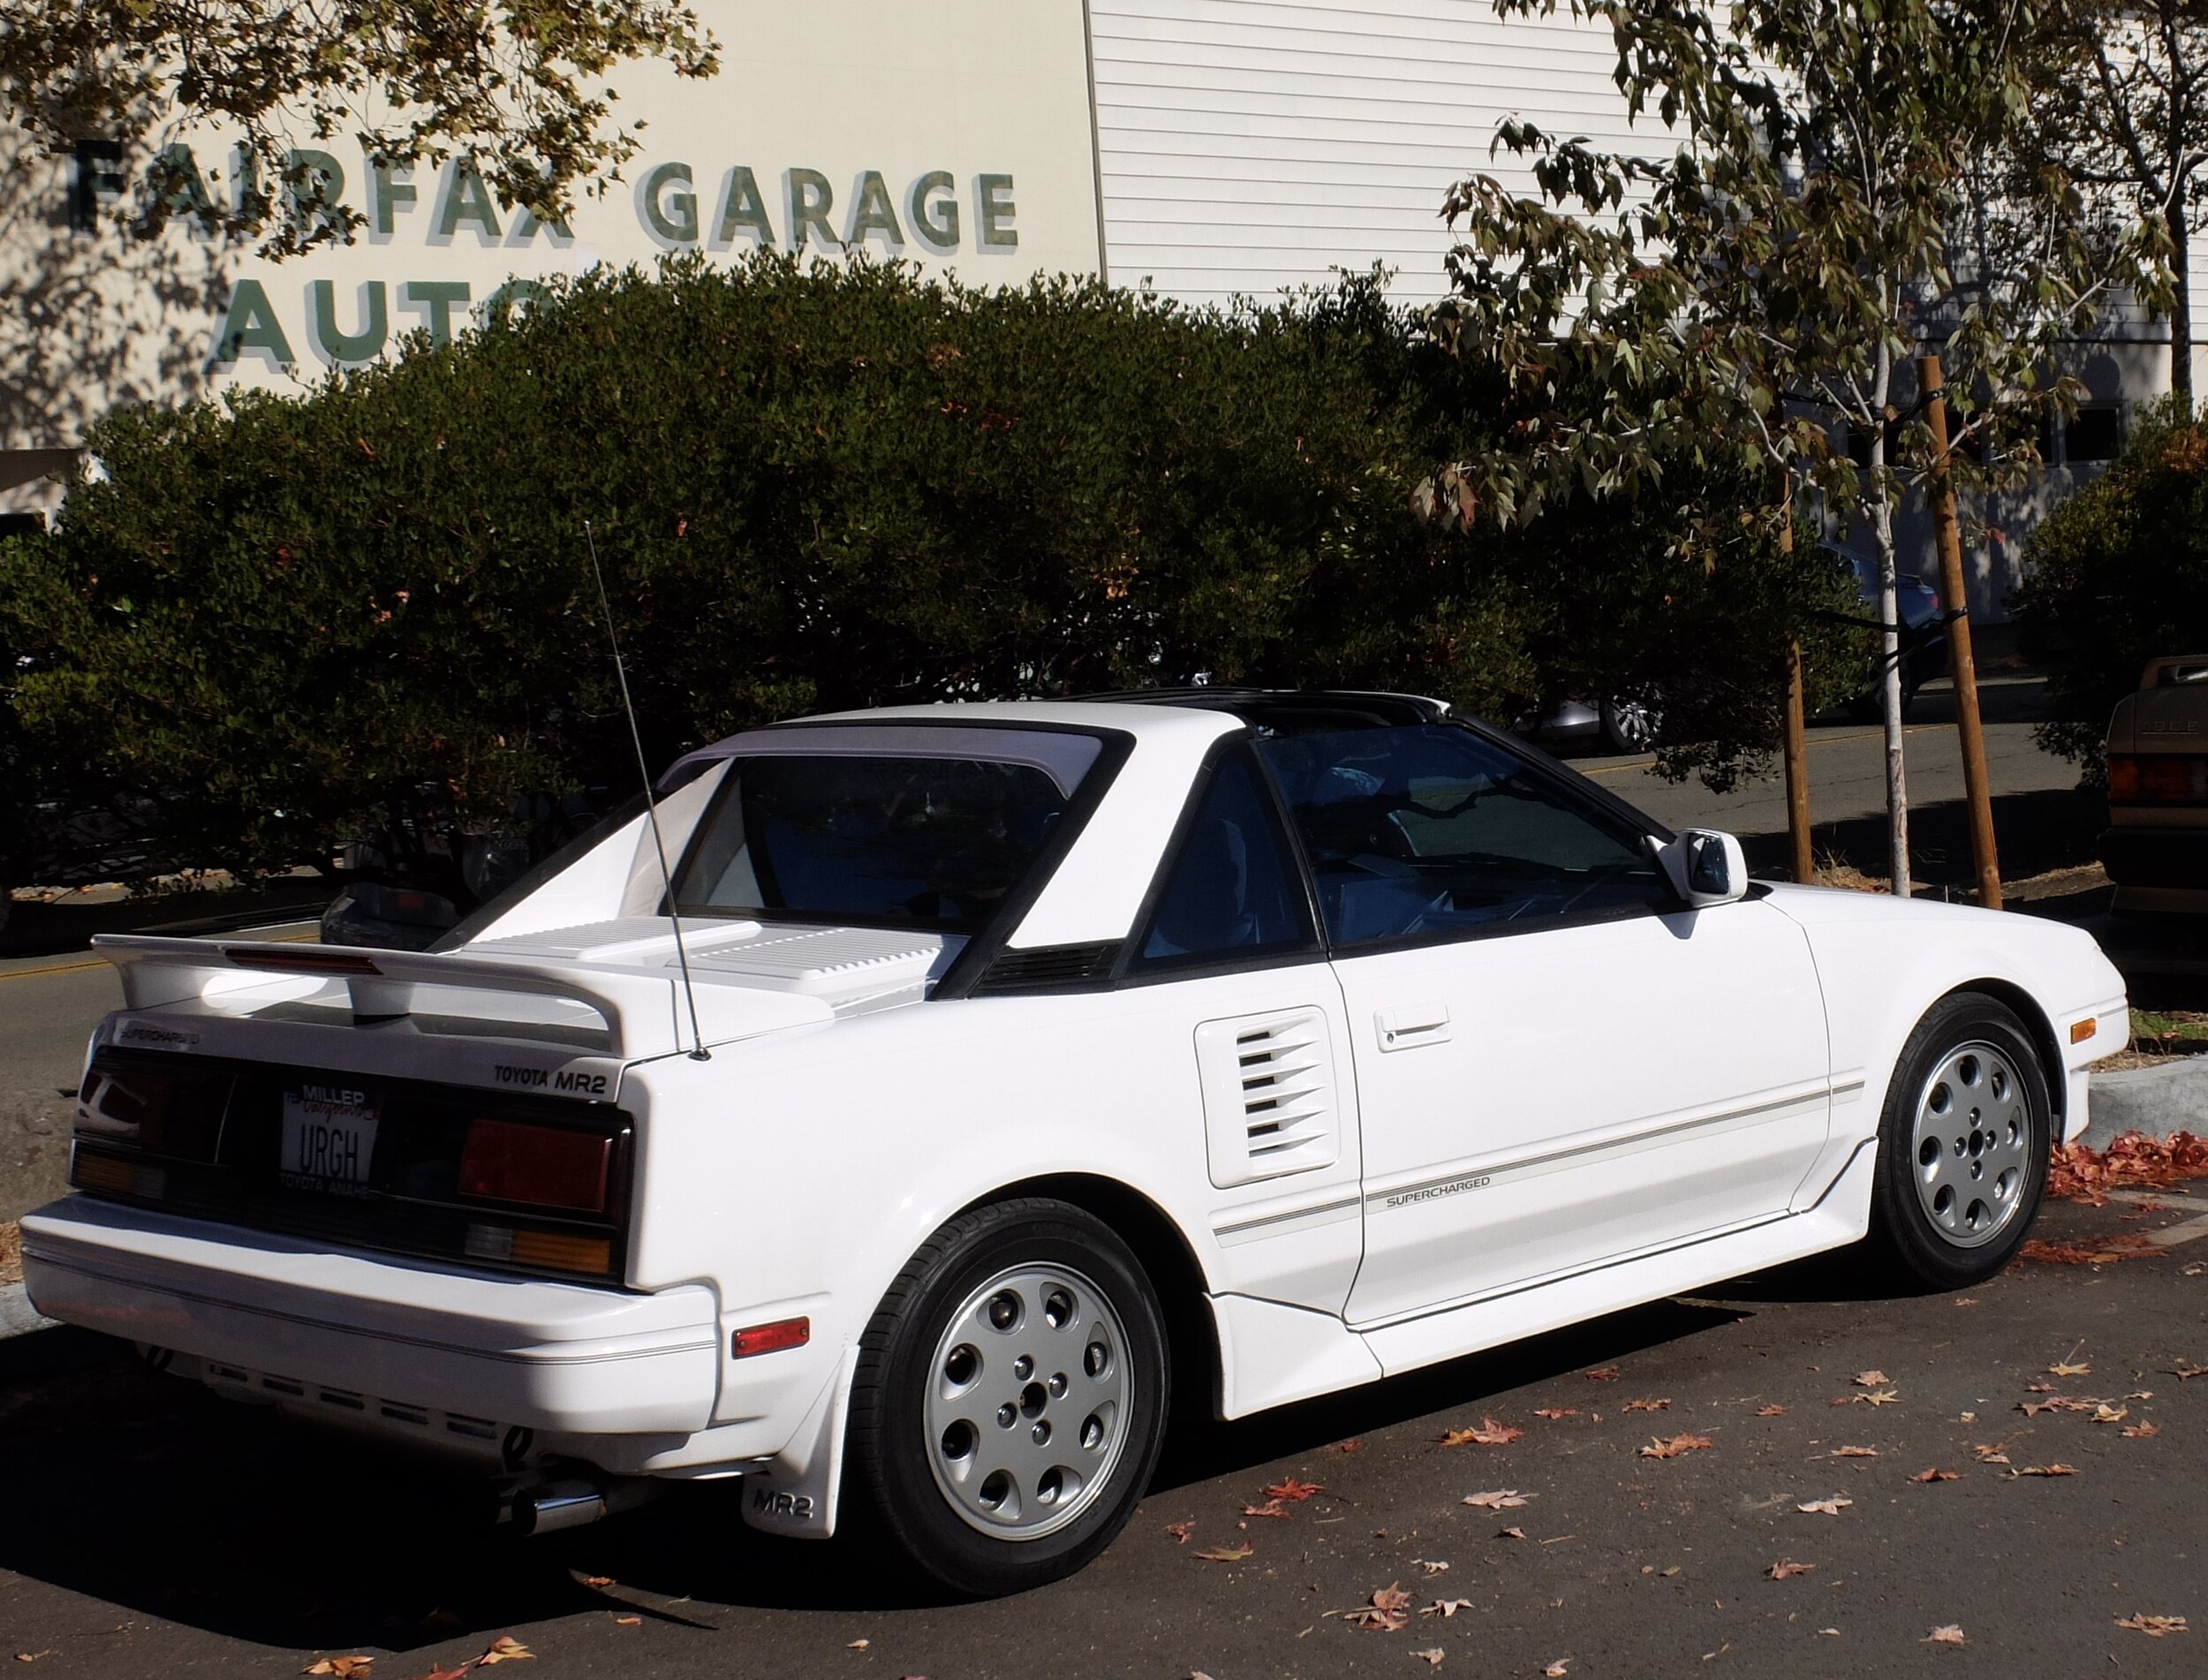 The MR 2, one of my all time favorite designs. Reminiscent of Starwars.